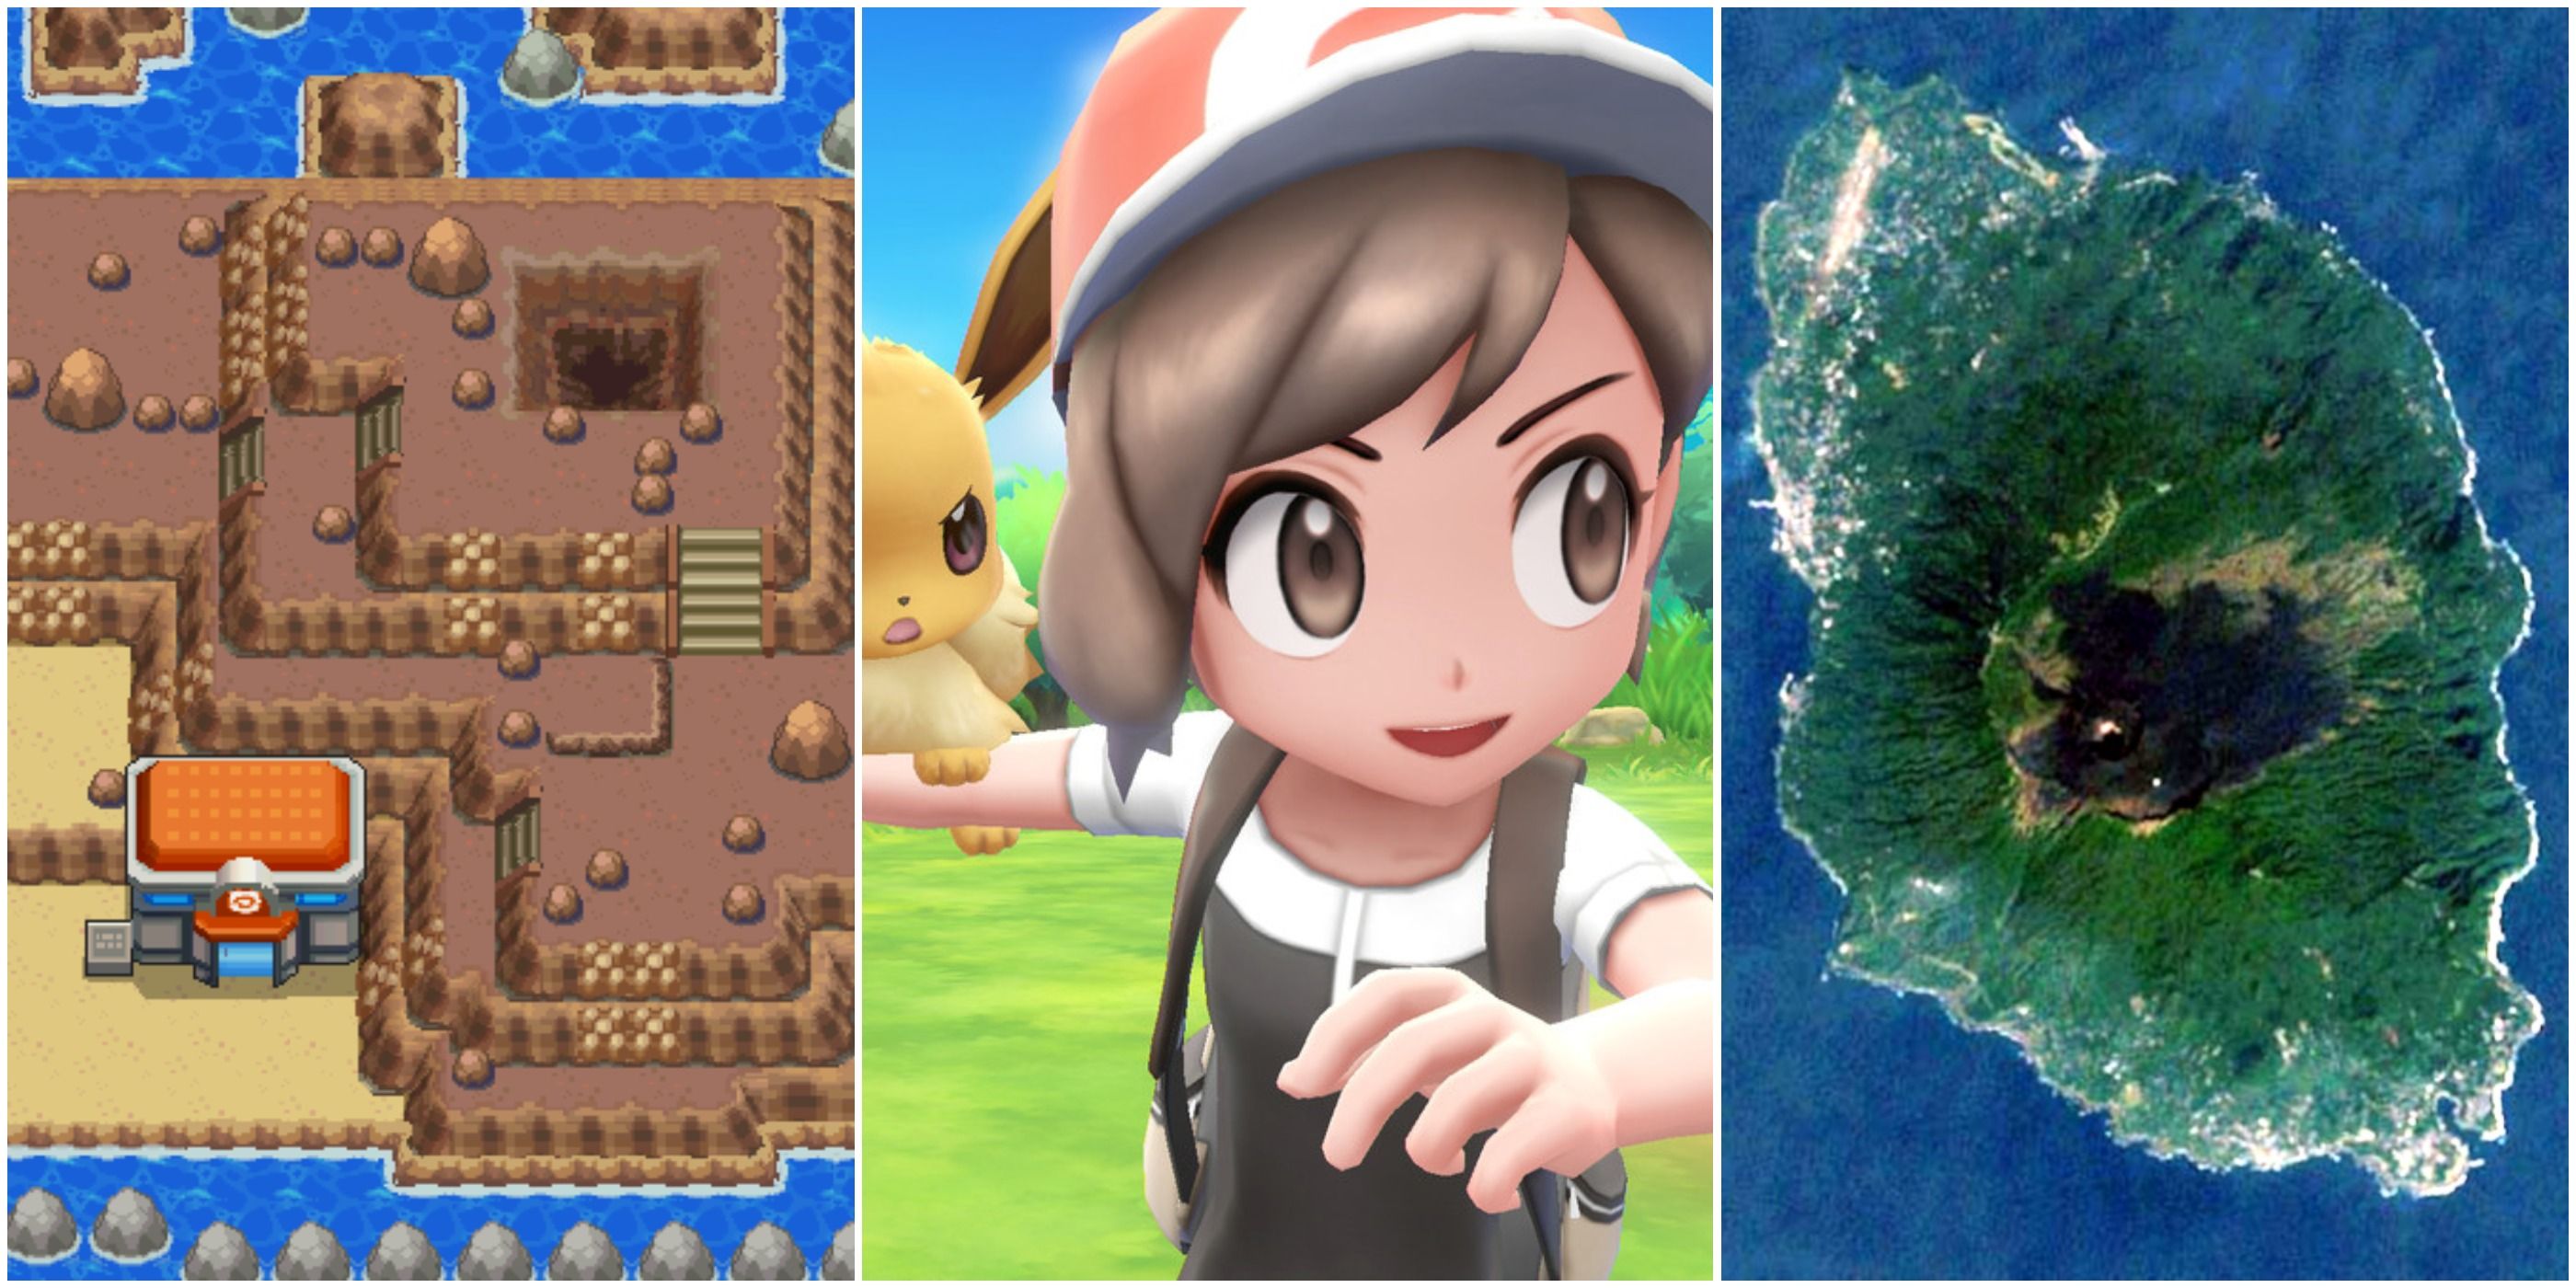 Cinnabar Island from Pokemon HeartGold and SoulSilver next to the female protagonist from Let's Go Pikachu & Eevee, next to a sattelite image of Izu Oshima Island in Japan.